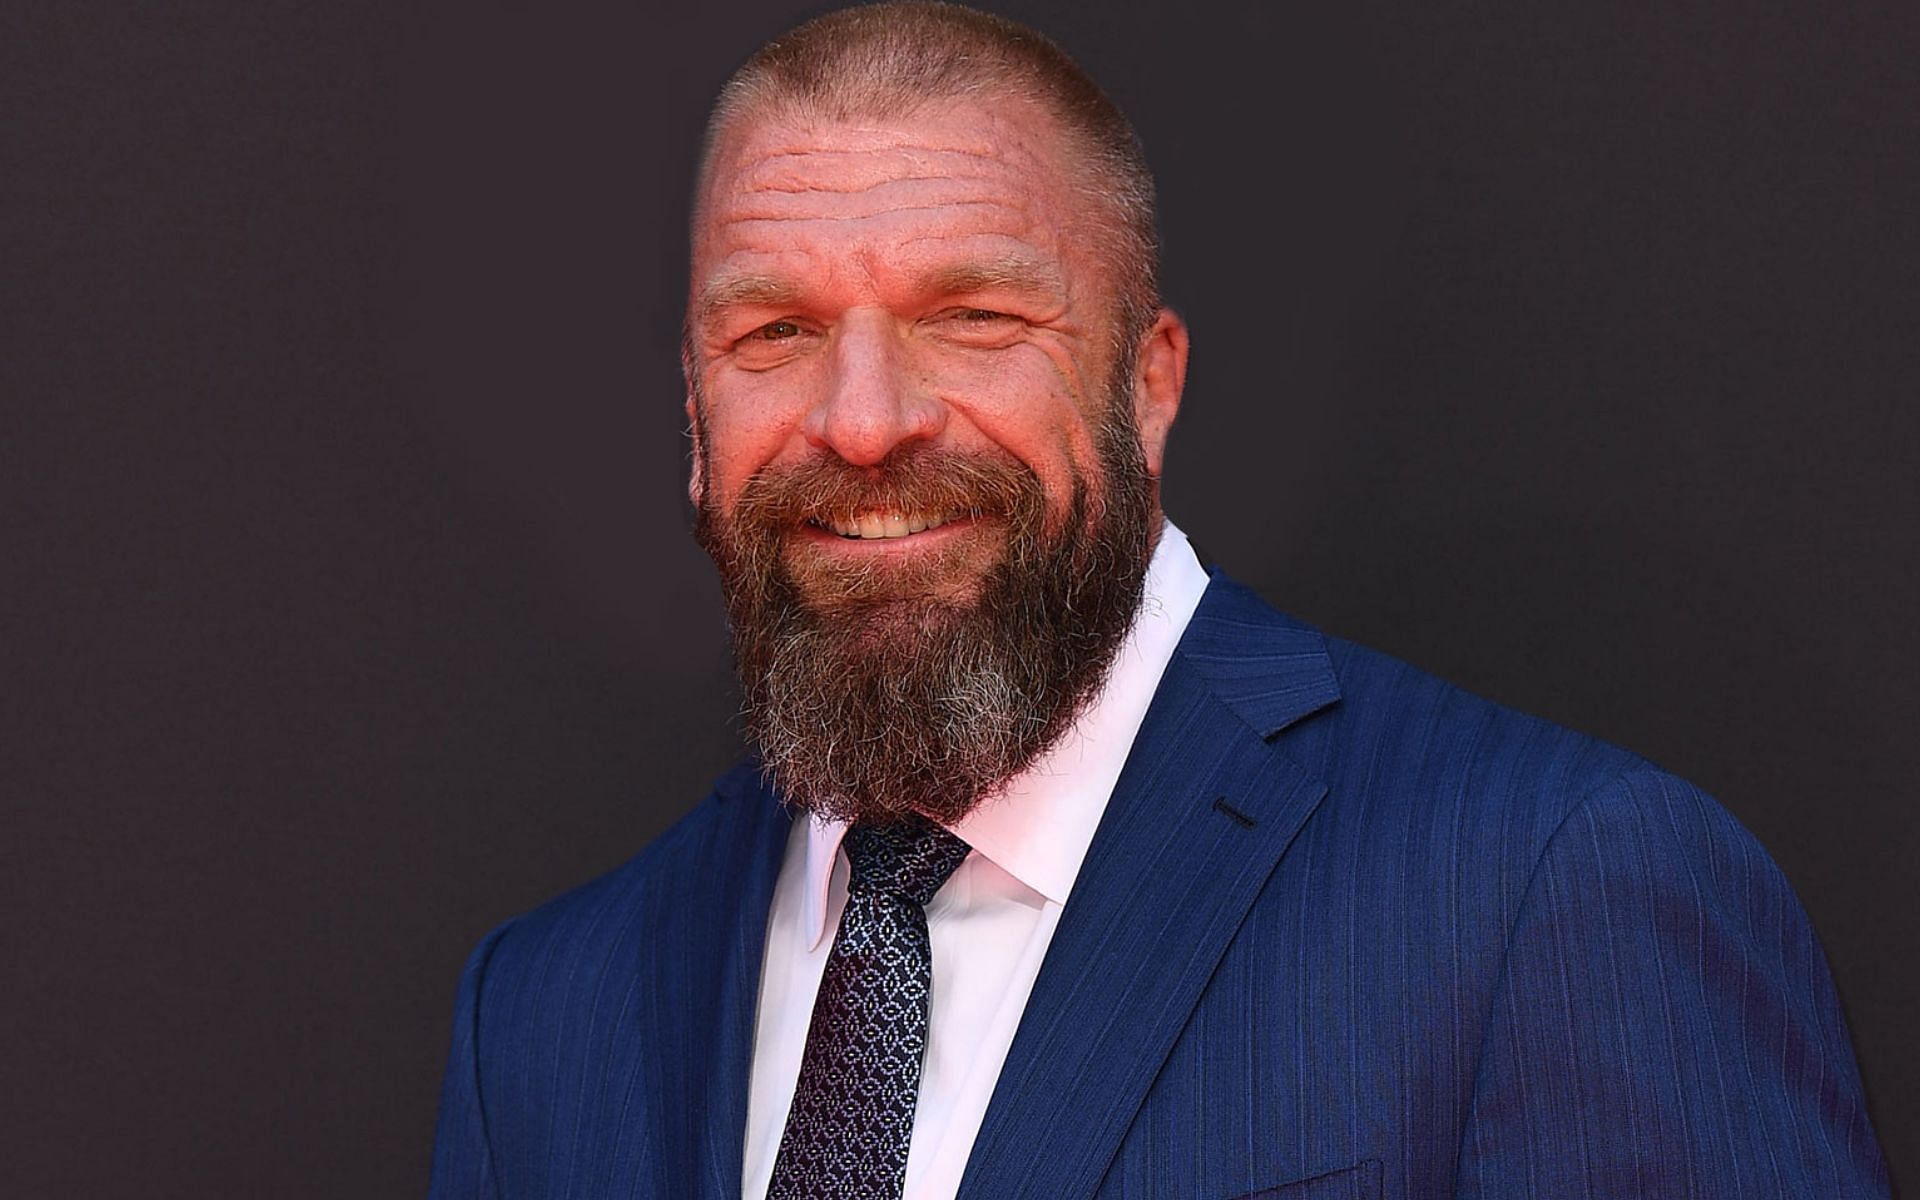 Triple H has left no stone unturned on his quest to strengthen the WWE roster